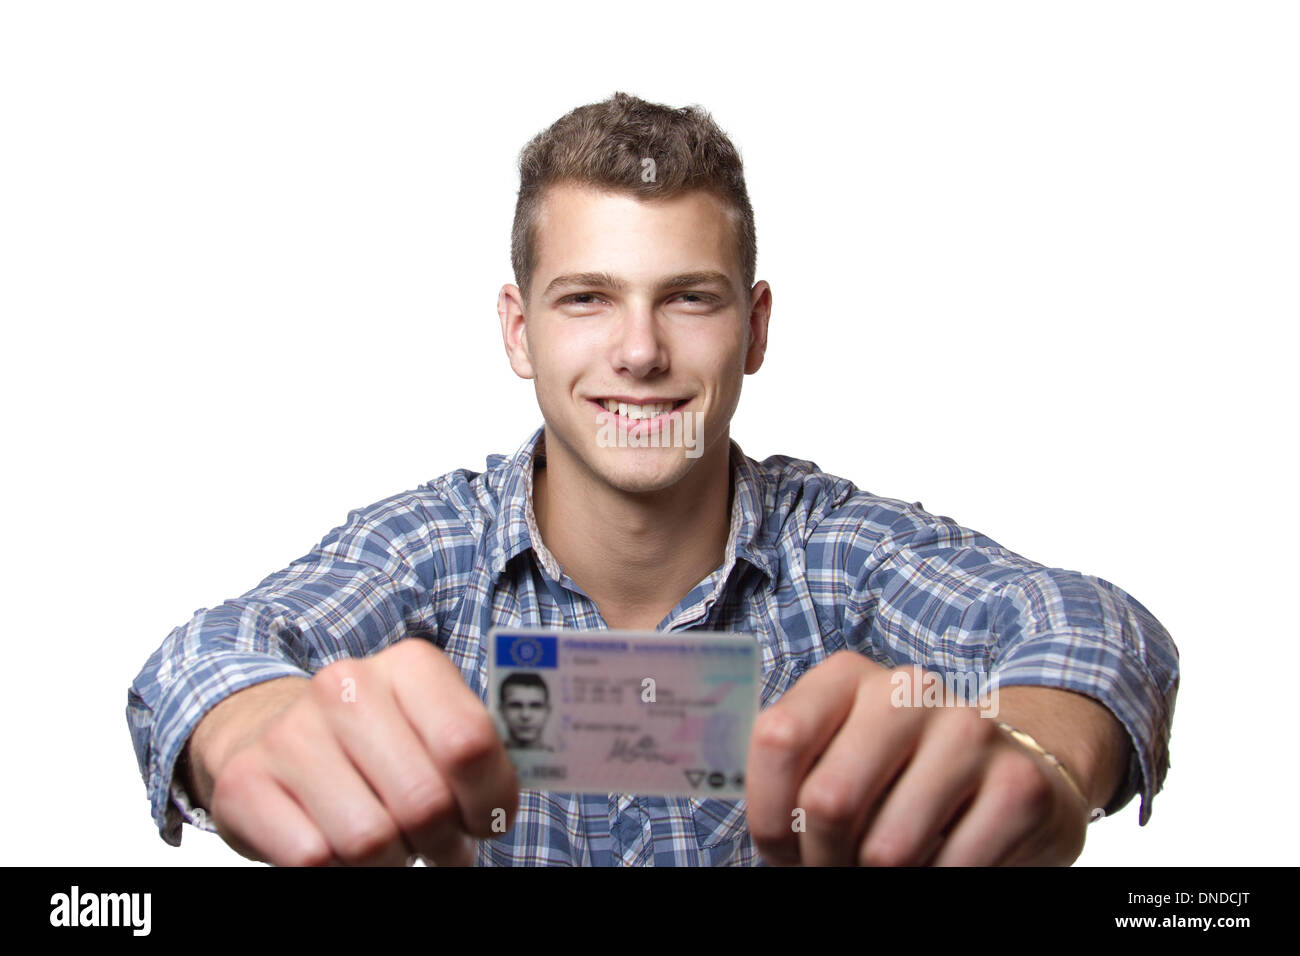 Young man just recieved his drivers license and is happy to drive his own car soon Stock Photo